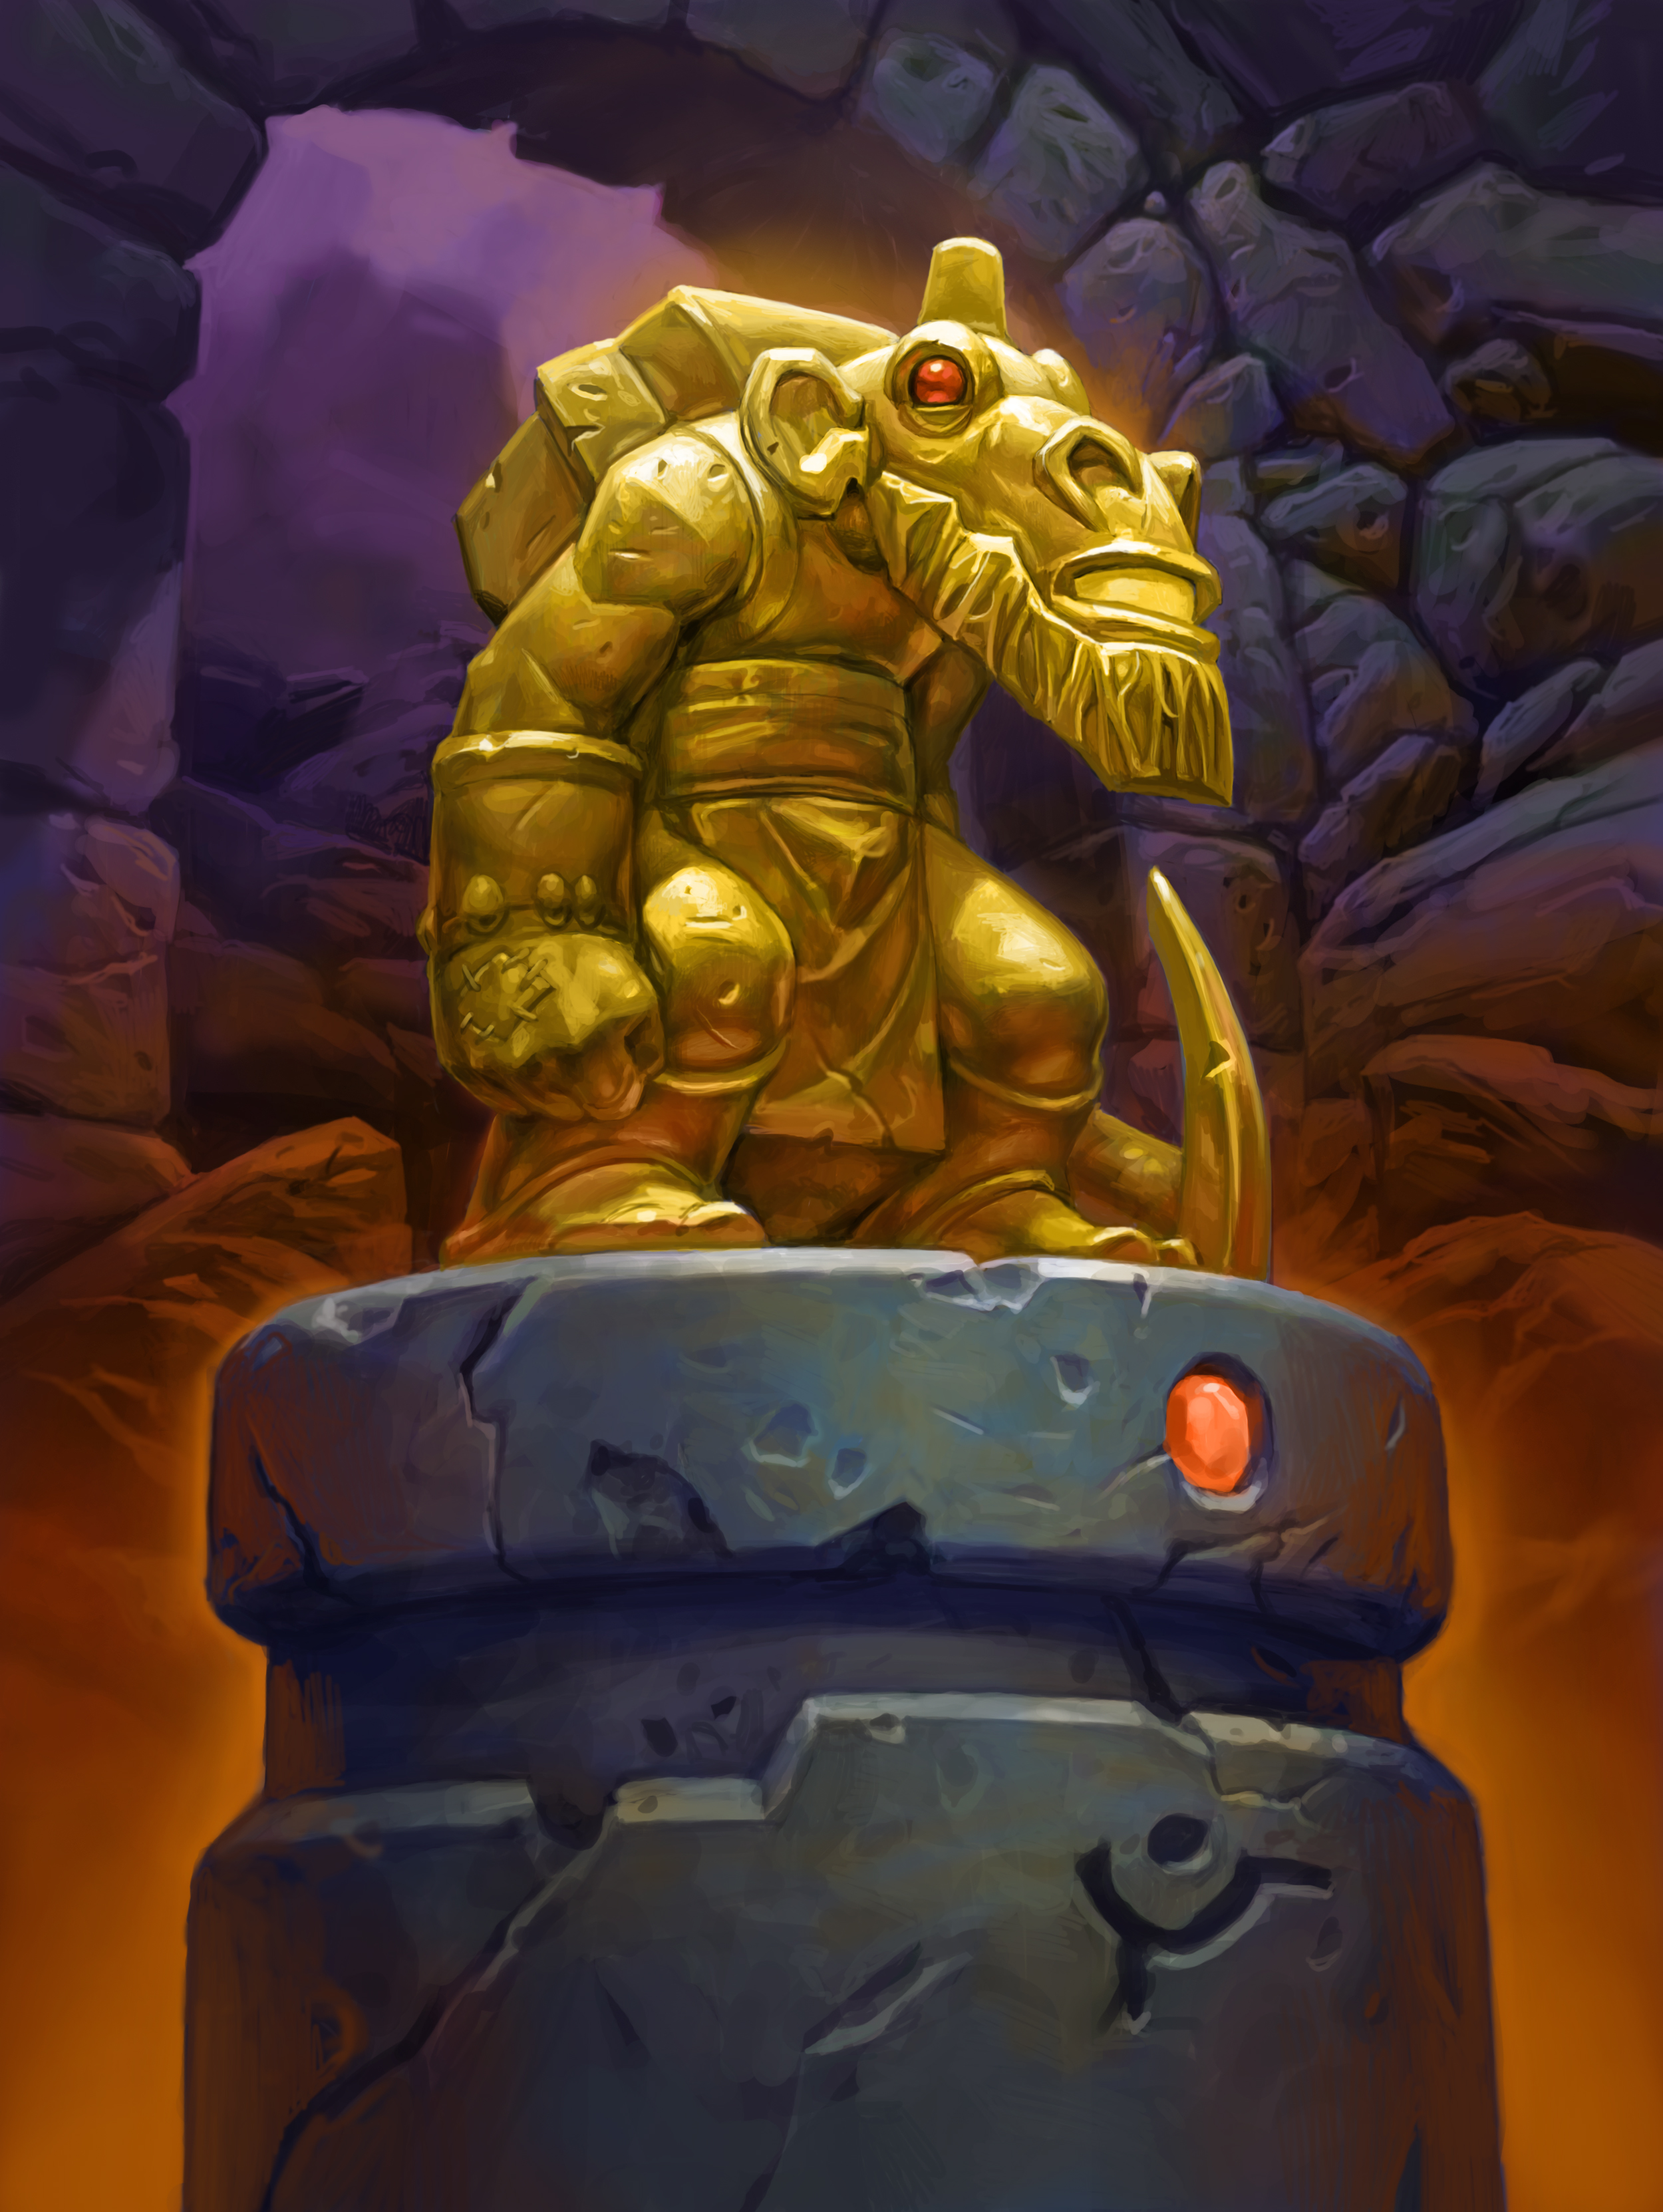 Hearthstone: Heroes of Warcraft, Hearthstone: Kobolds and Catacombs Wallpaper